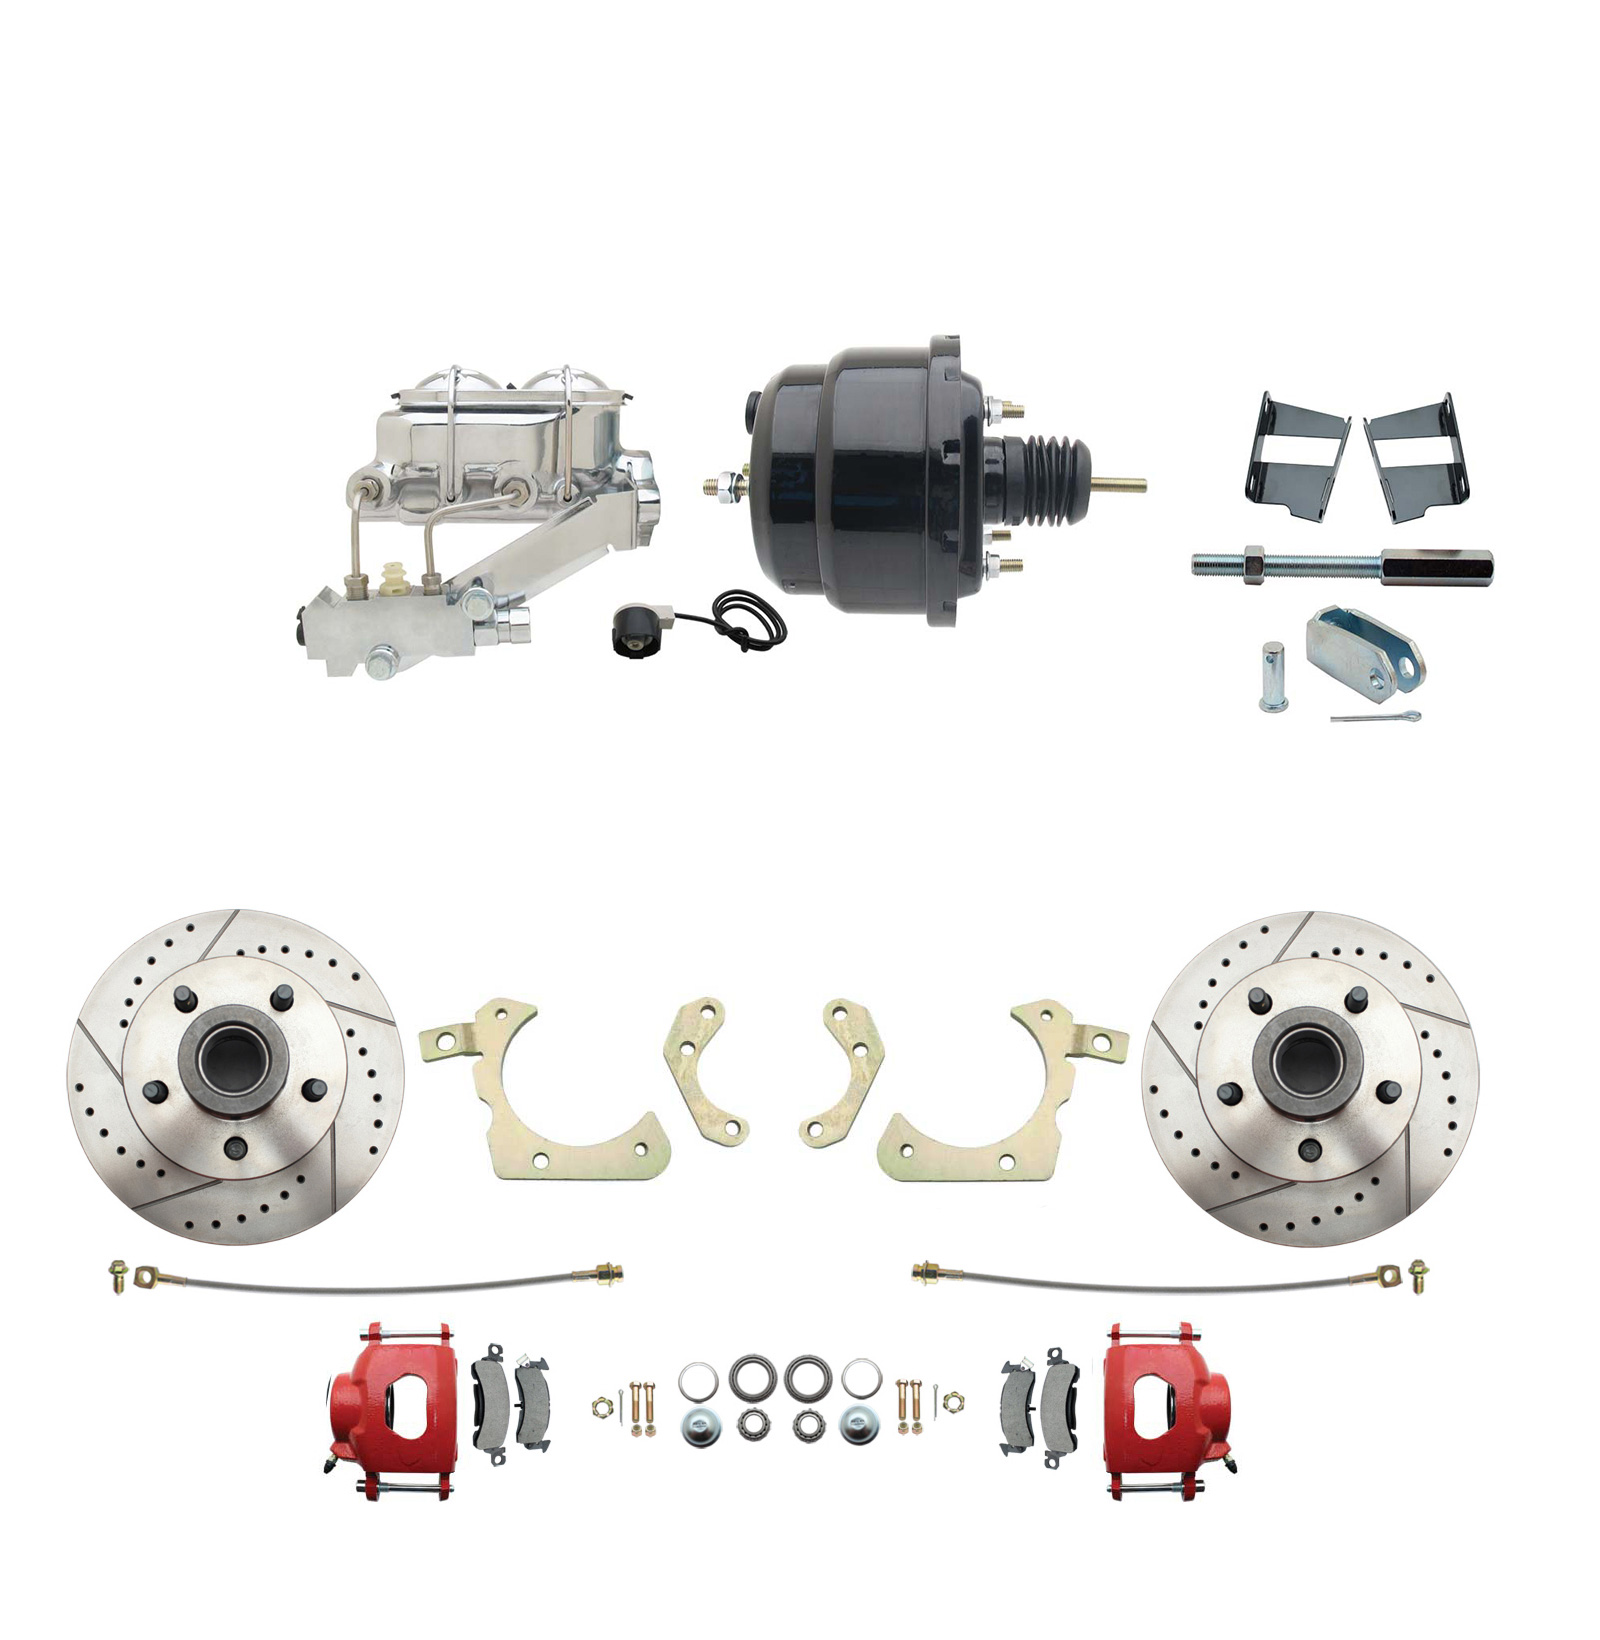 1959-1964 GM Full Size Front Disc Brake Kit Black Powder Coated Calipers Drilled/Slotted Rotors (Impala, Bel Air, Biscayne) & 8 Dual Powder Coated Black Booster Conversion Kit W/ Chrome Master Cylinder Left Mount Disc/ Drum P